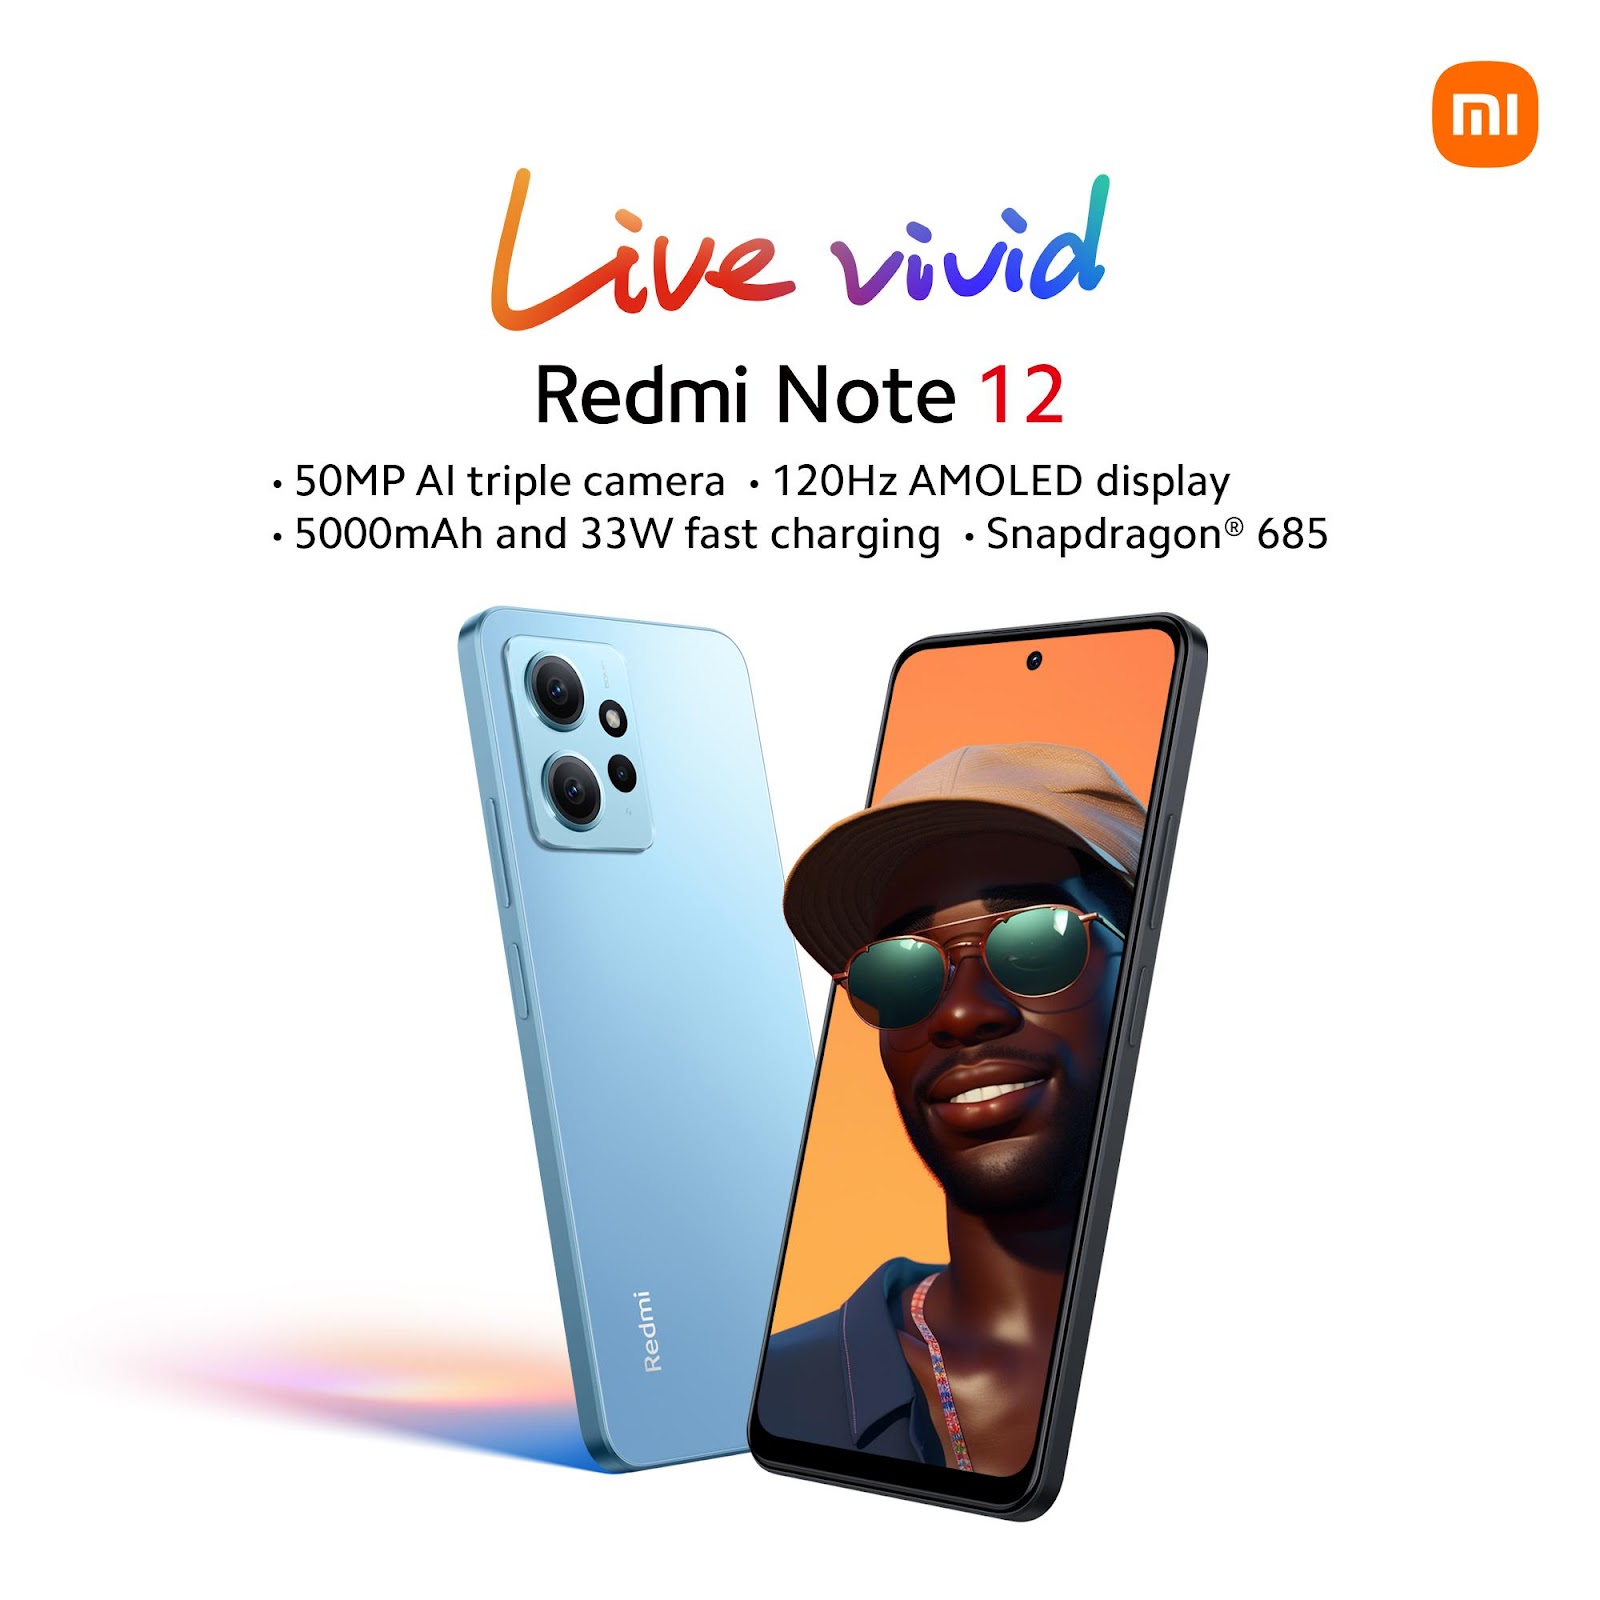 Xiaomi Redmi Note 12 4G review: Design and handling